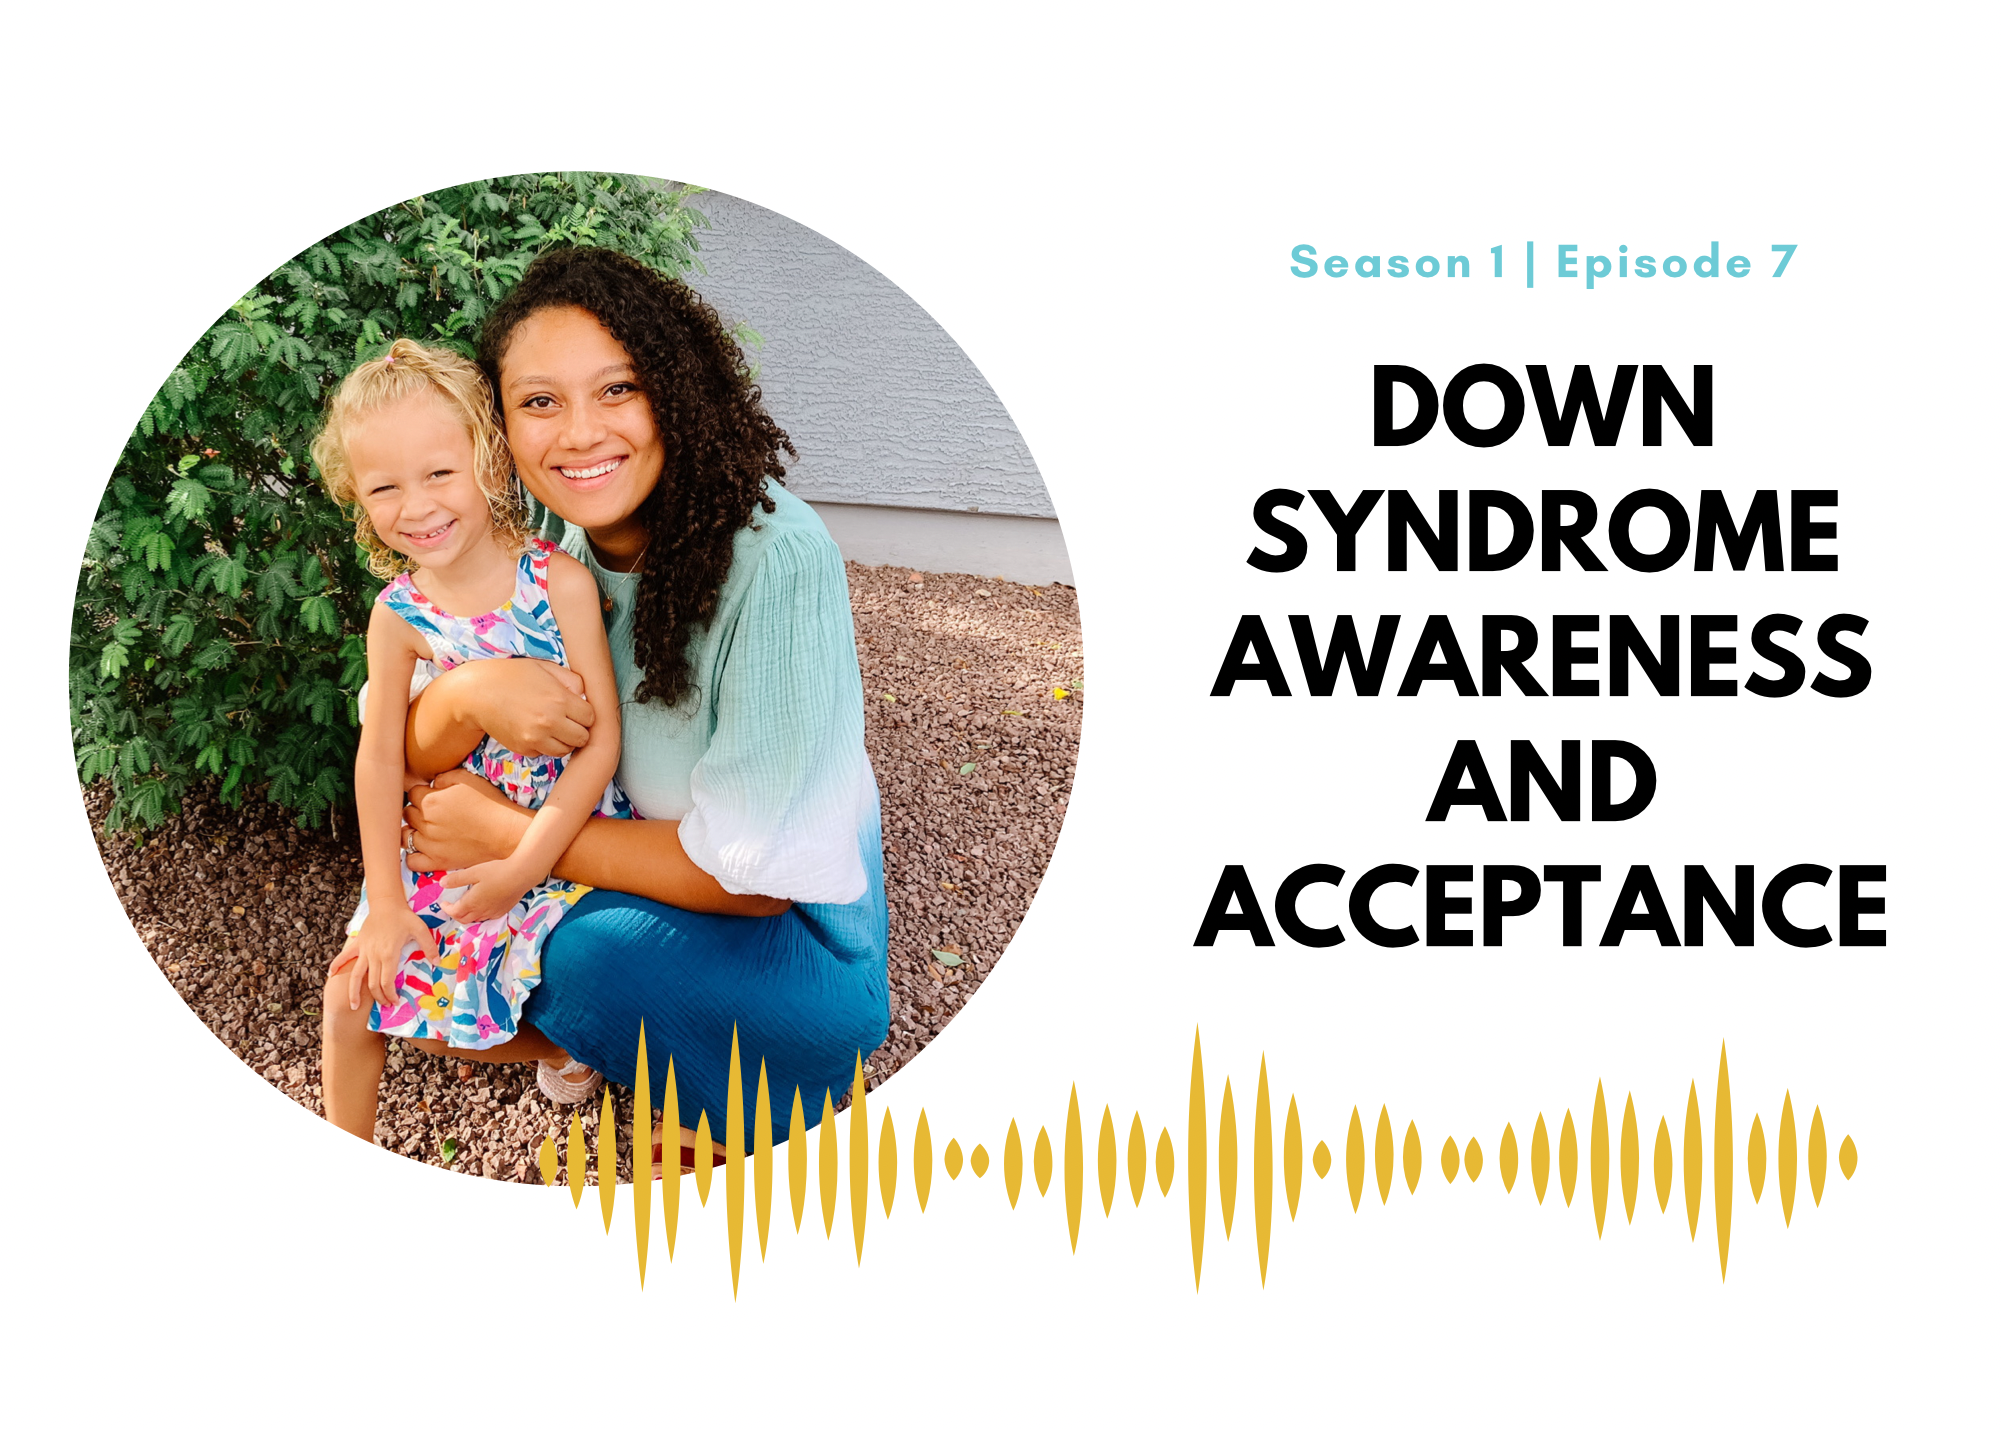 Down Syndrome Awareness and Acceptance